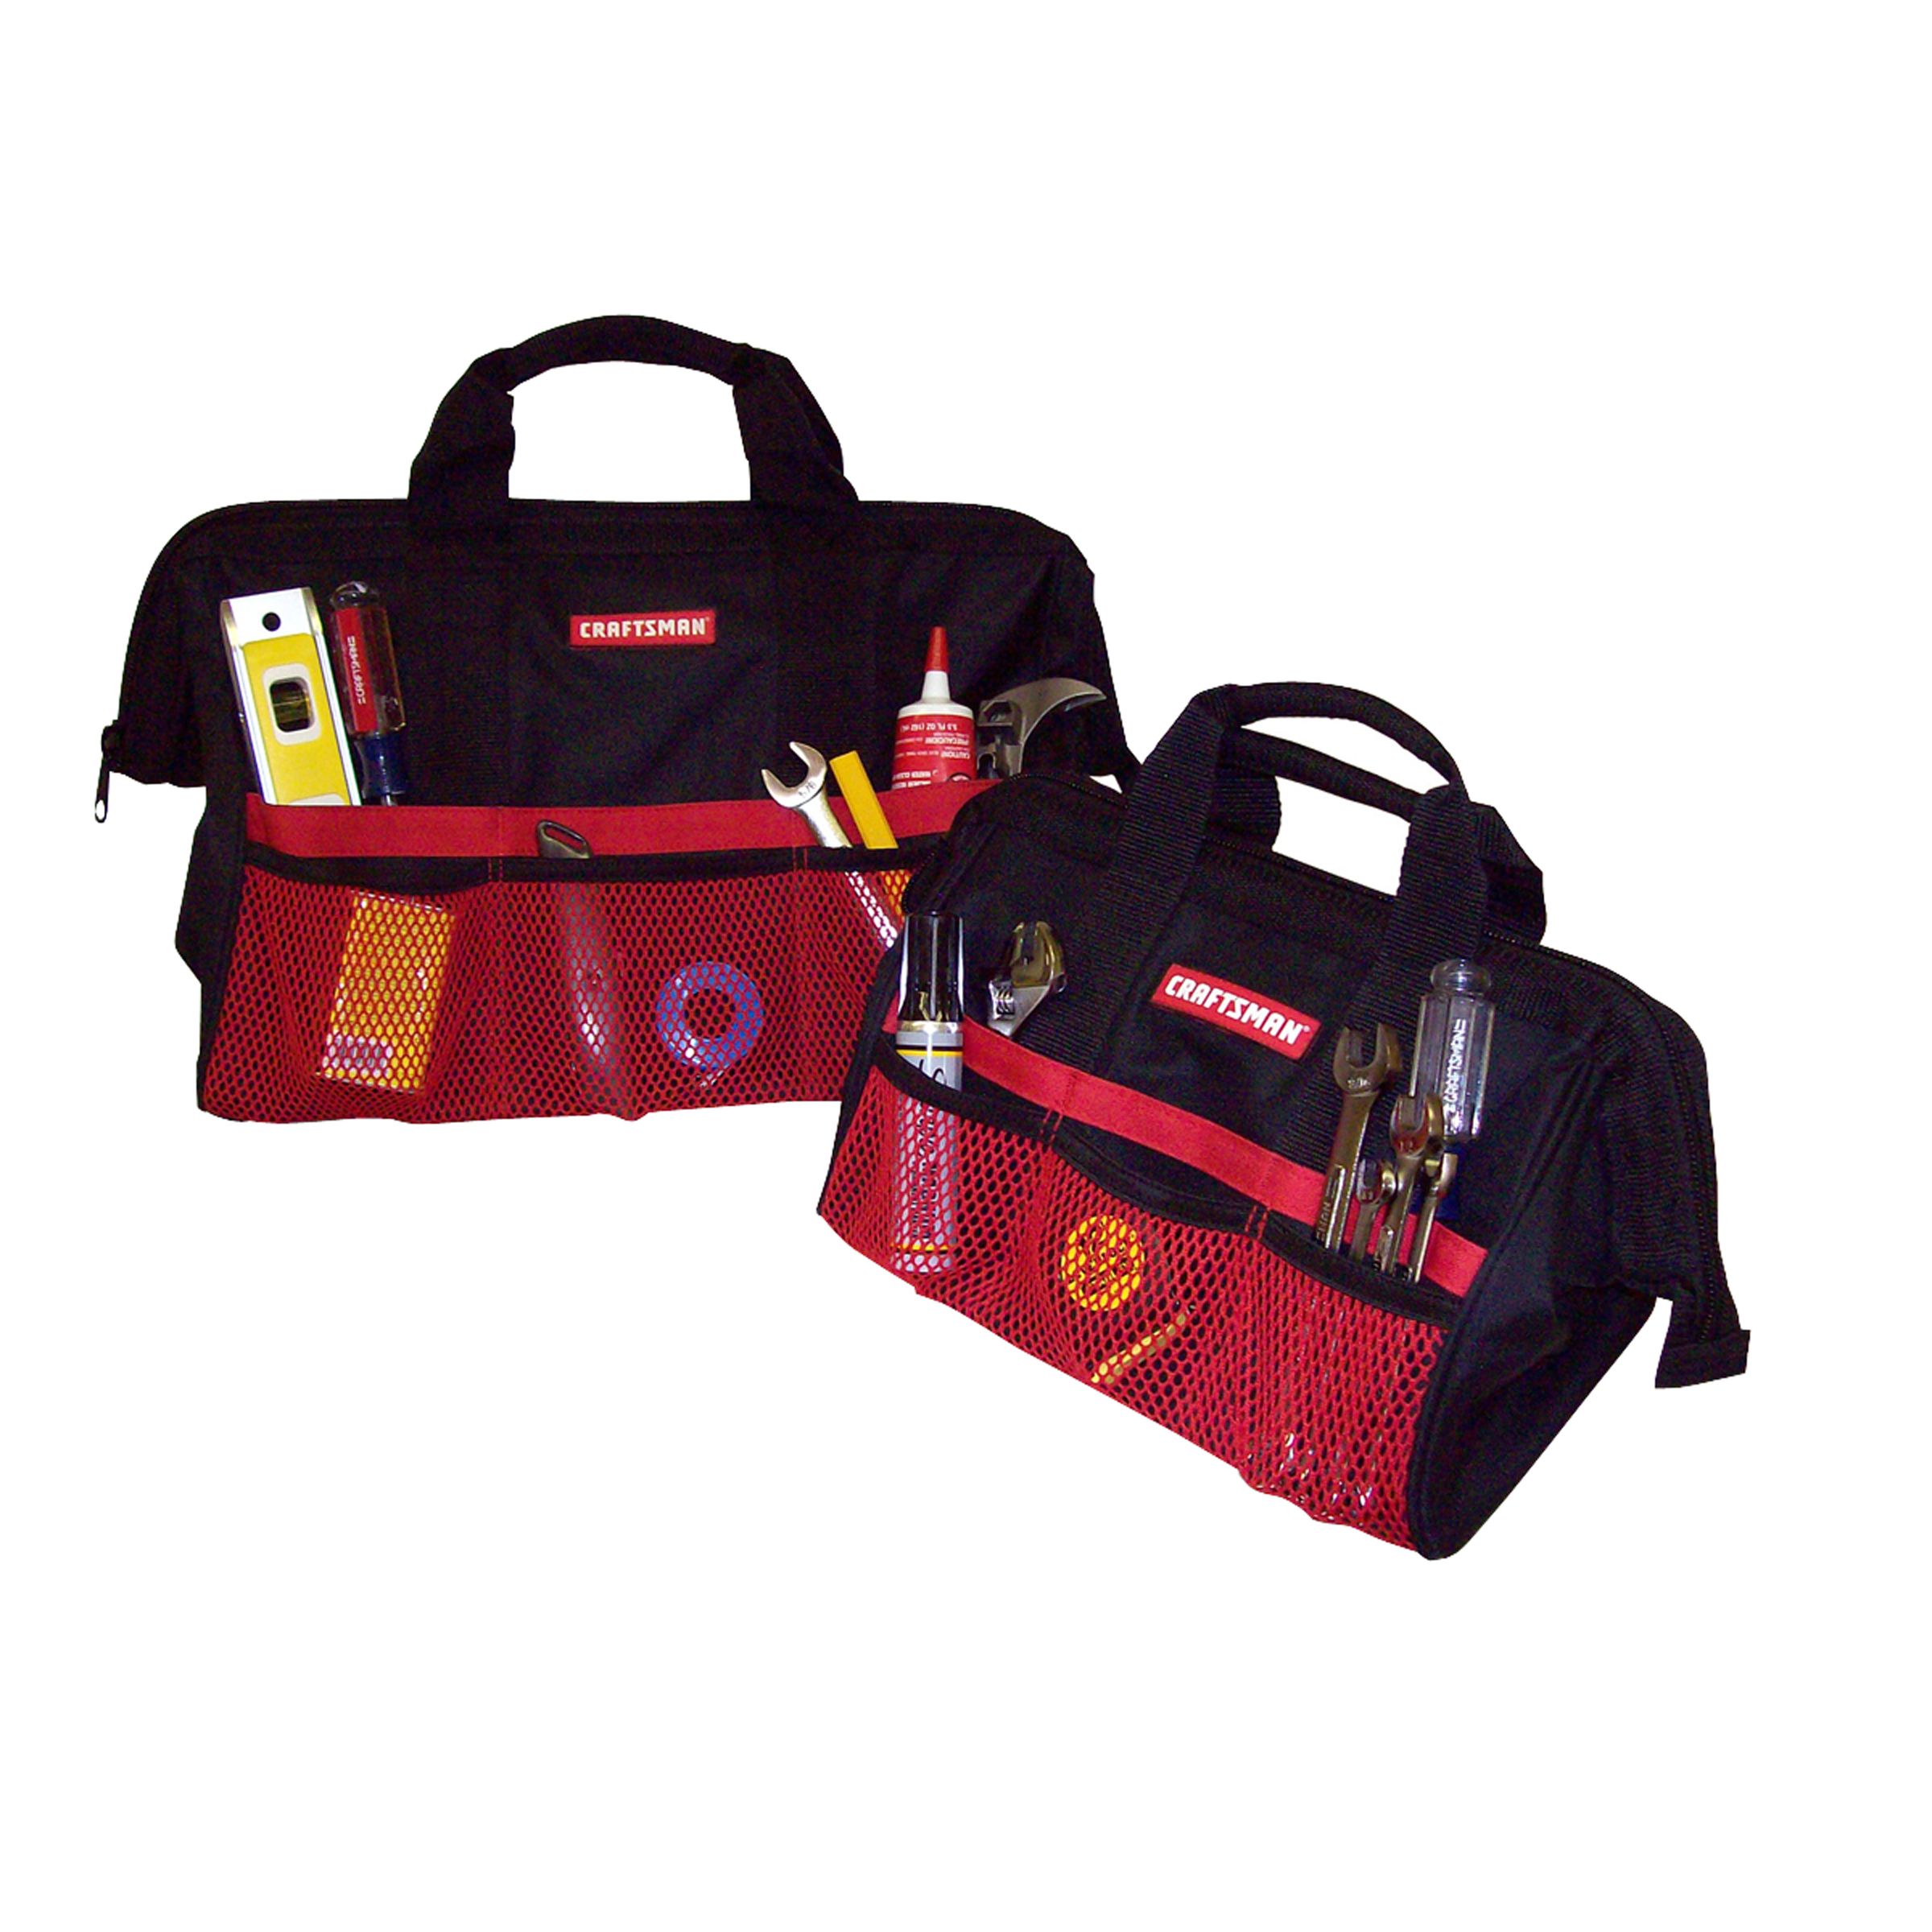 Craftsman 13 in. & 18 in. Tool Bag Combo—$9.99 (50% off)